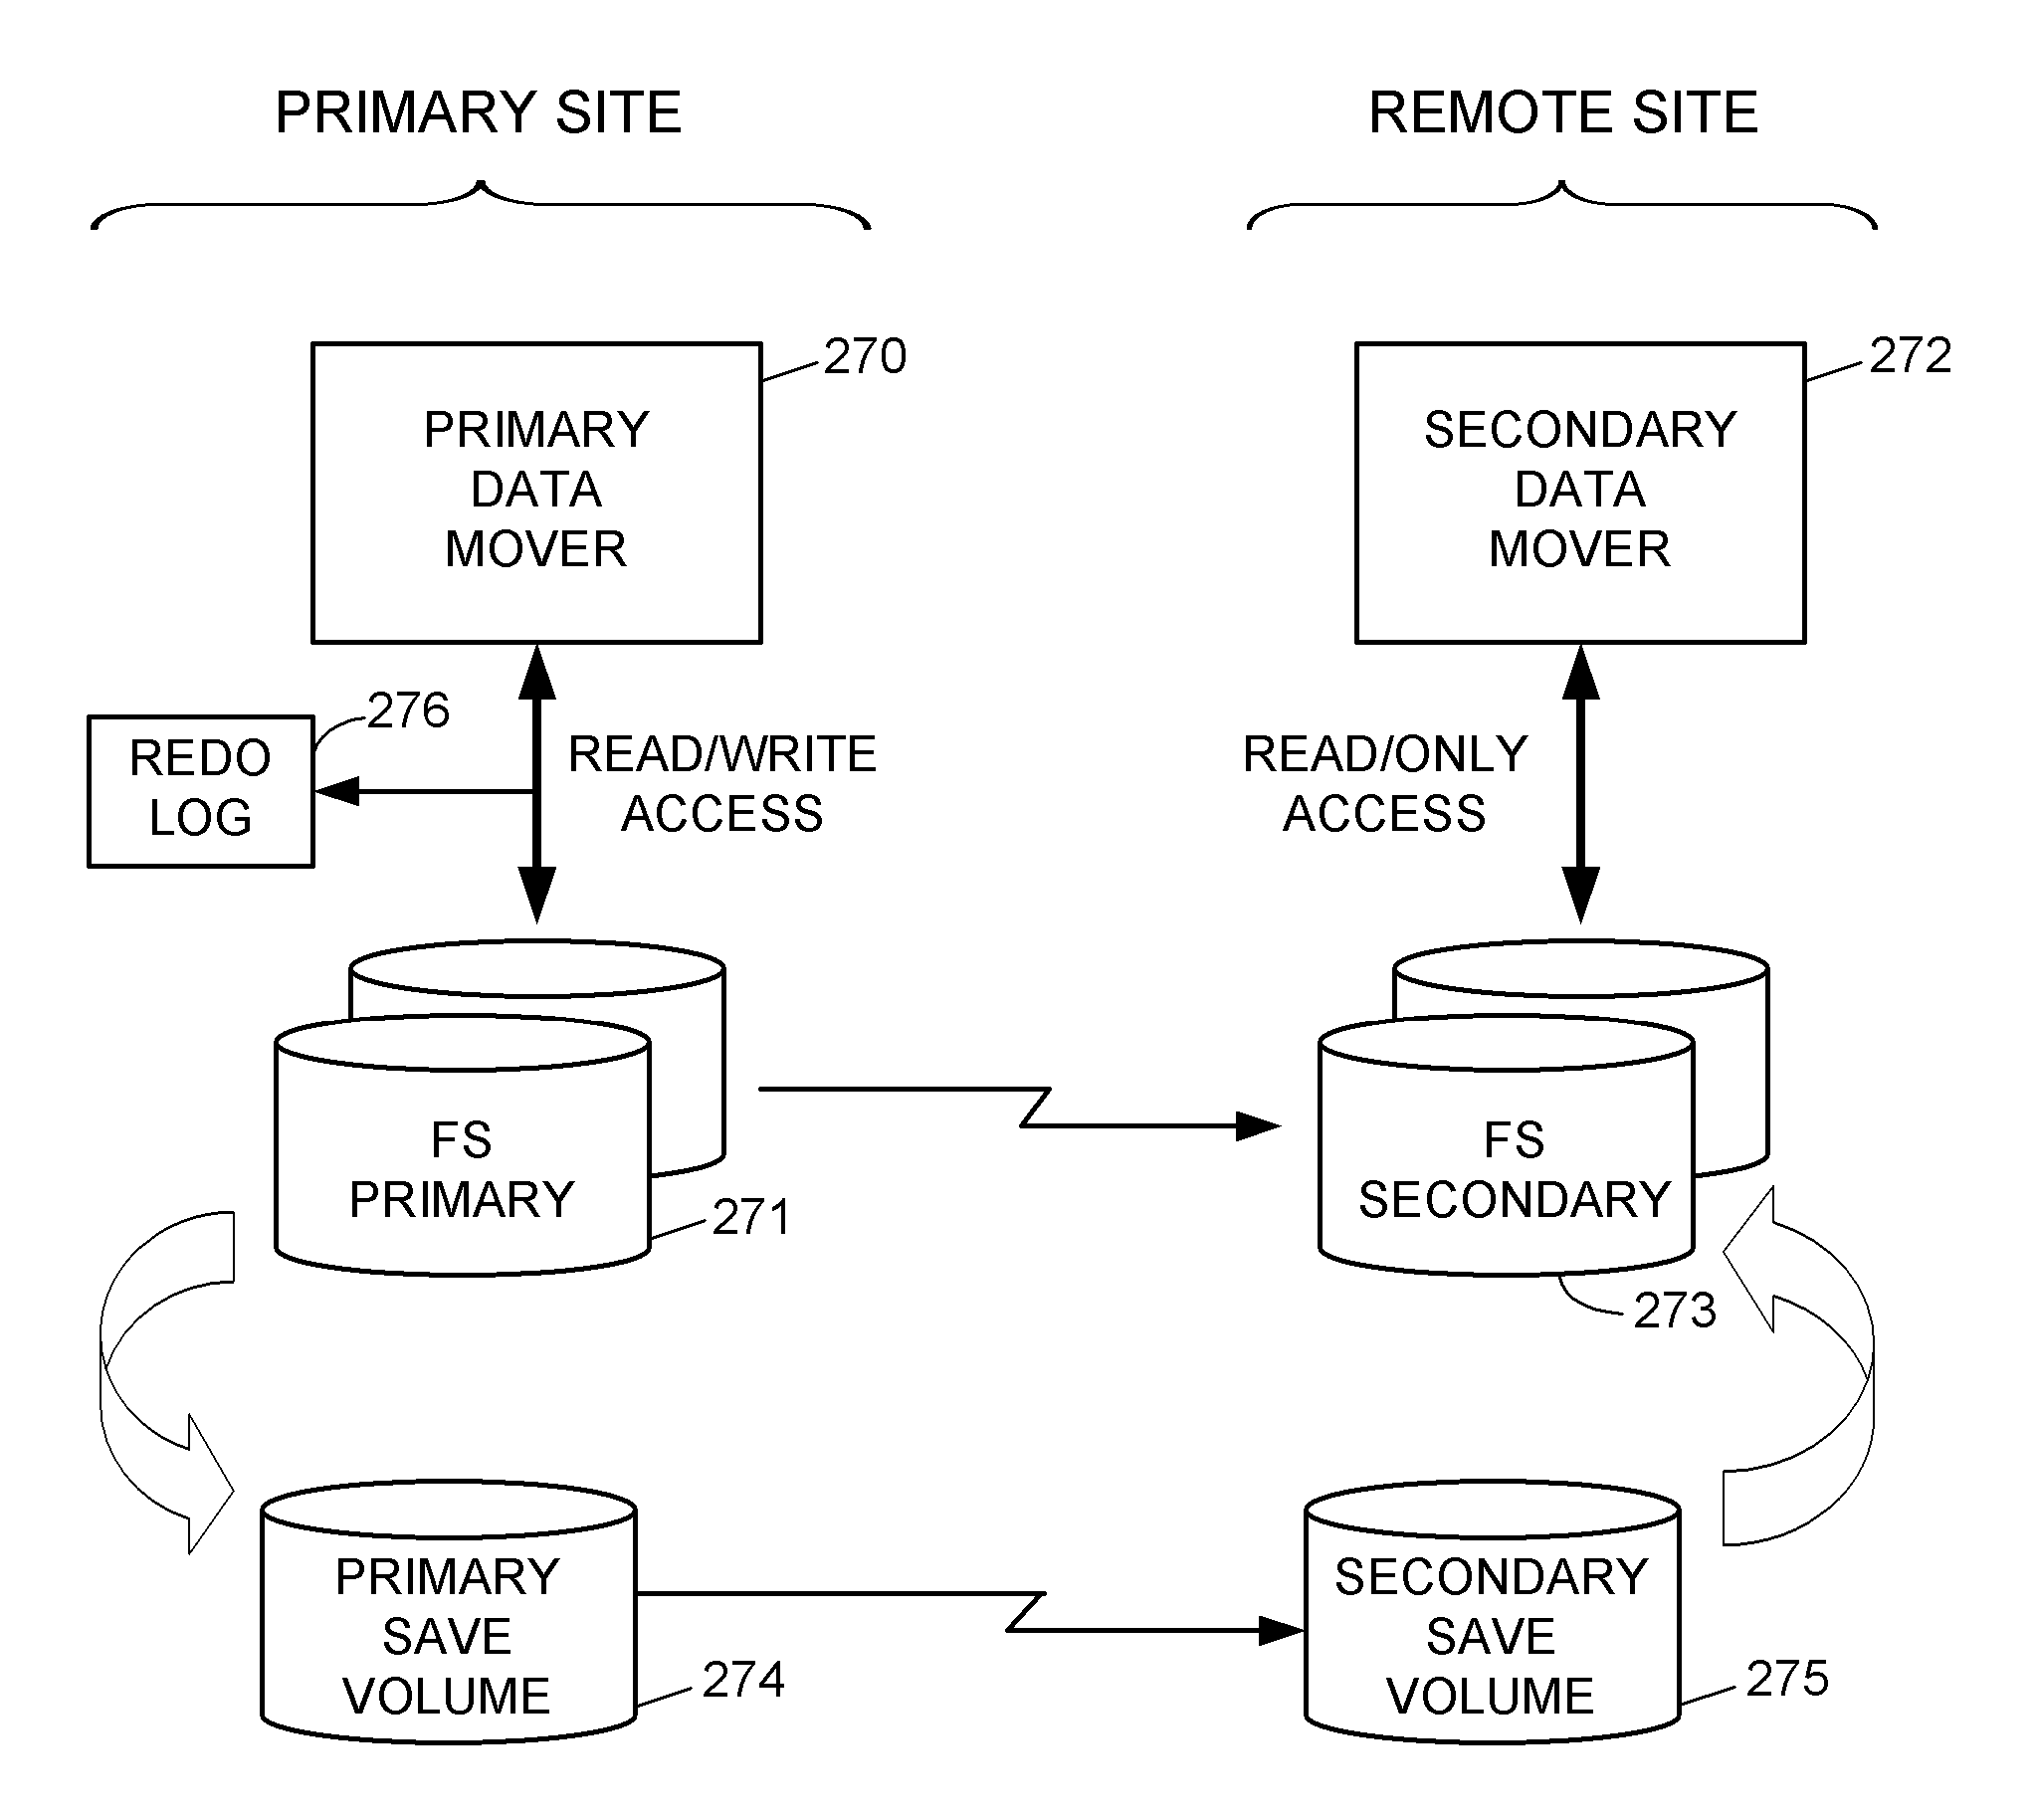 Replication of remote copy data for internet protocol (IP) transmission